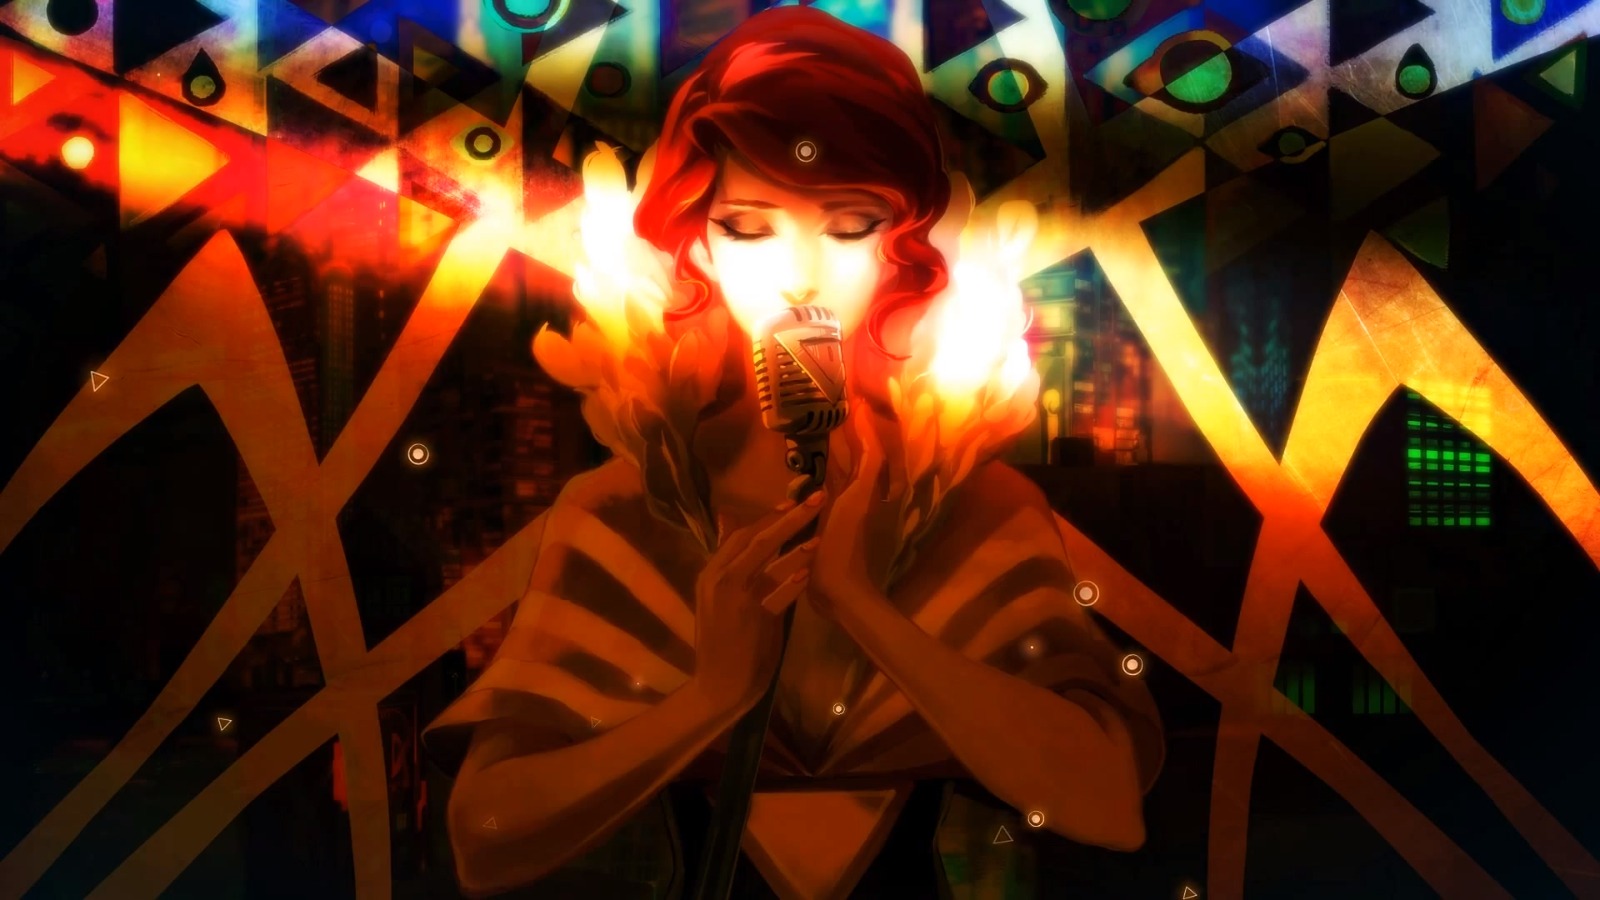 Specials of the day on the App Store: Transistor, 2D, Bastion and more!